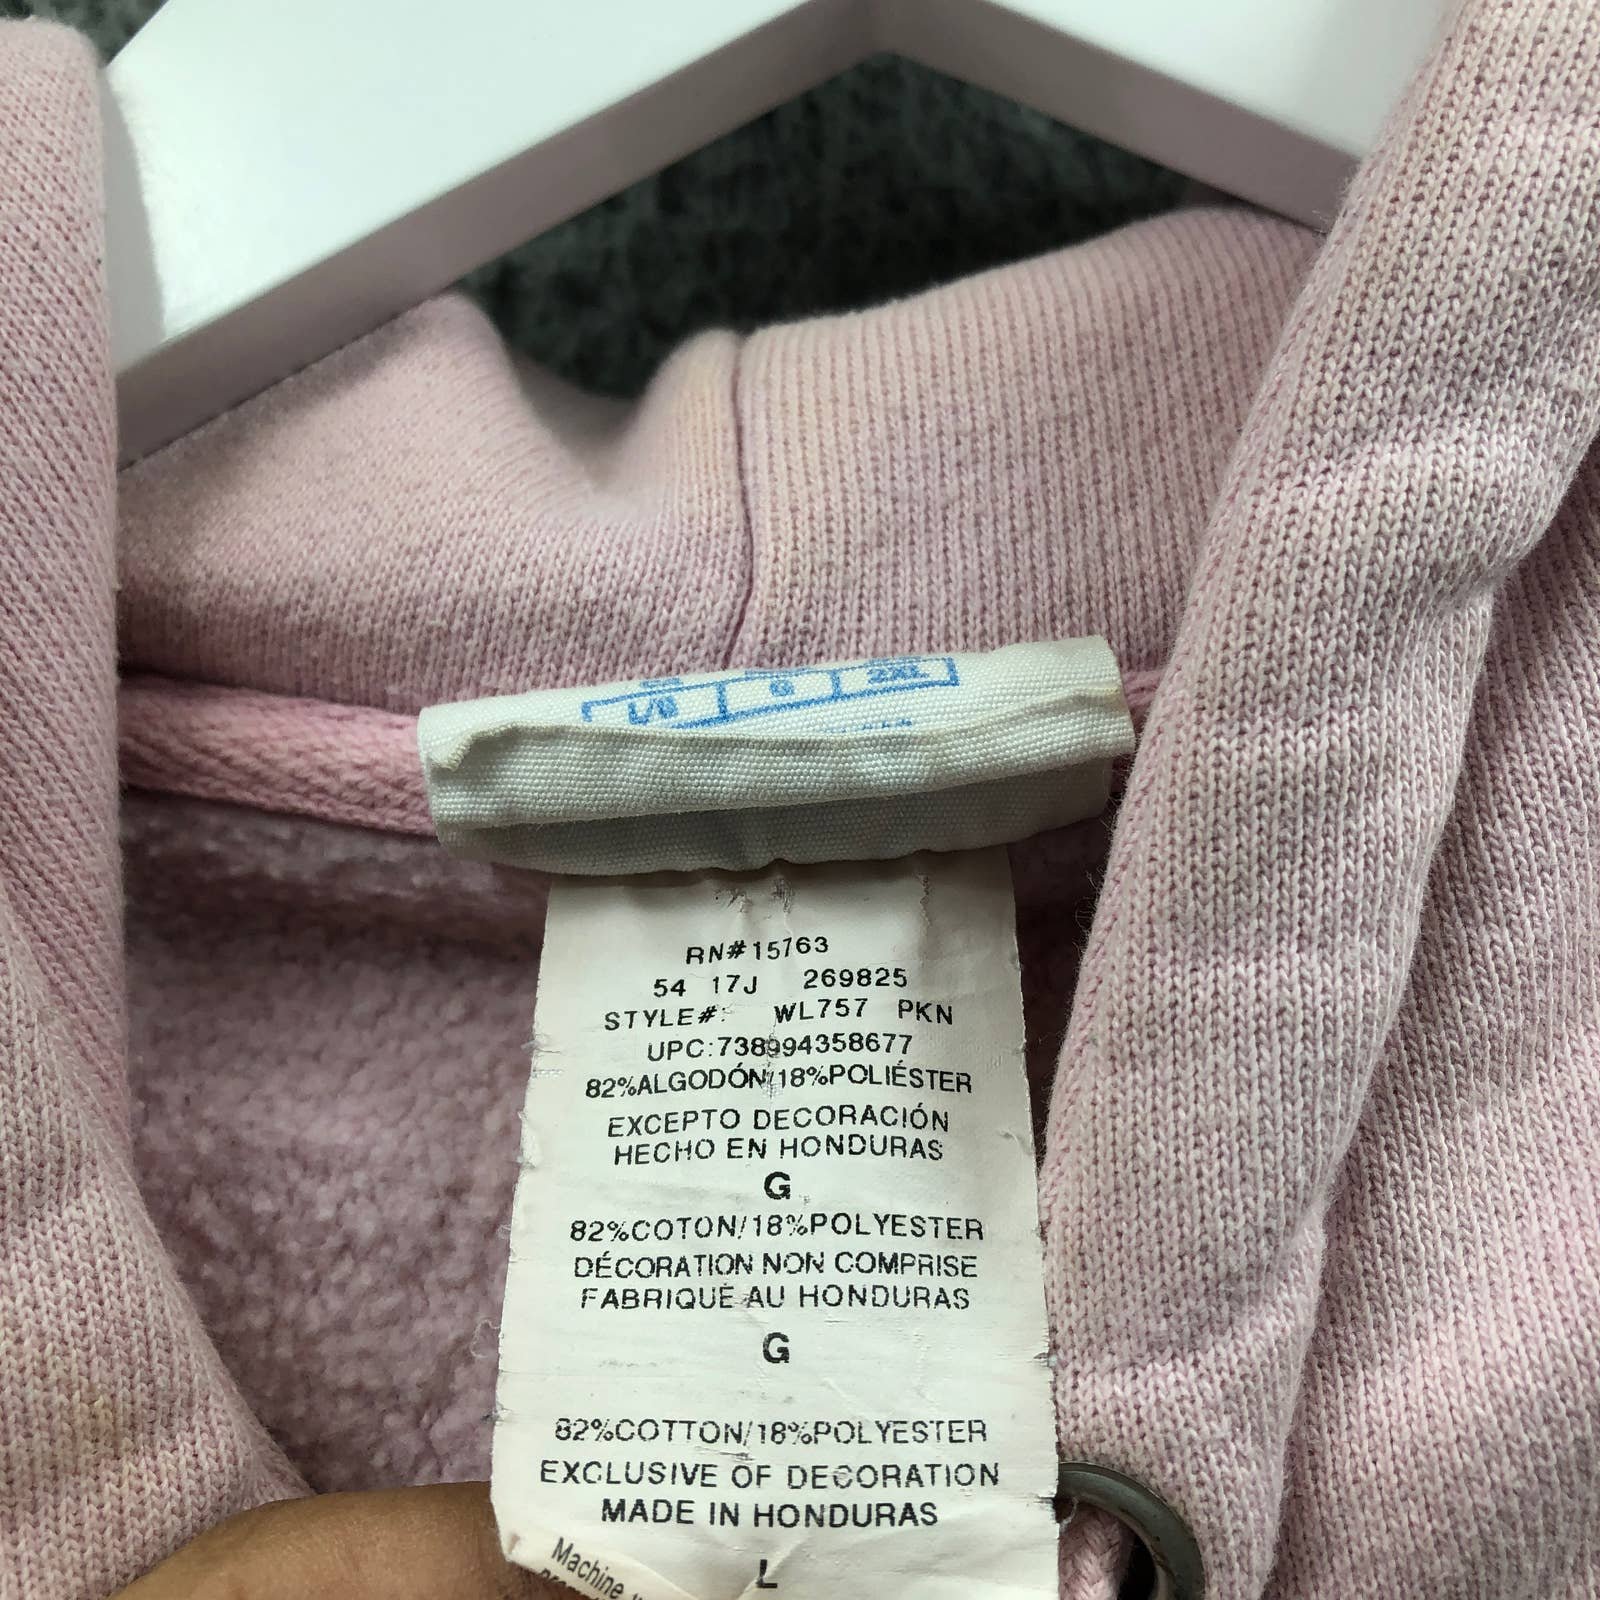 cheapest place to buy  Champion Reverse Weave Sweatshirt Hoodie Women´s Large L Embroidered Logo Pink gyTGXqUR8 Wholesale